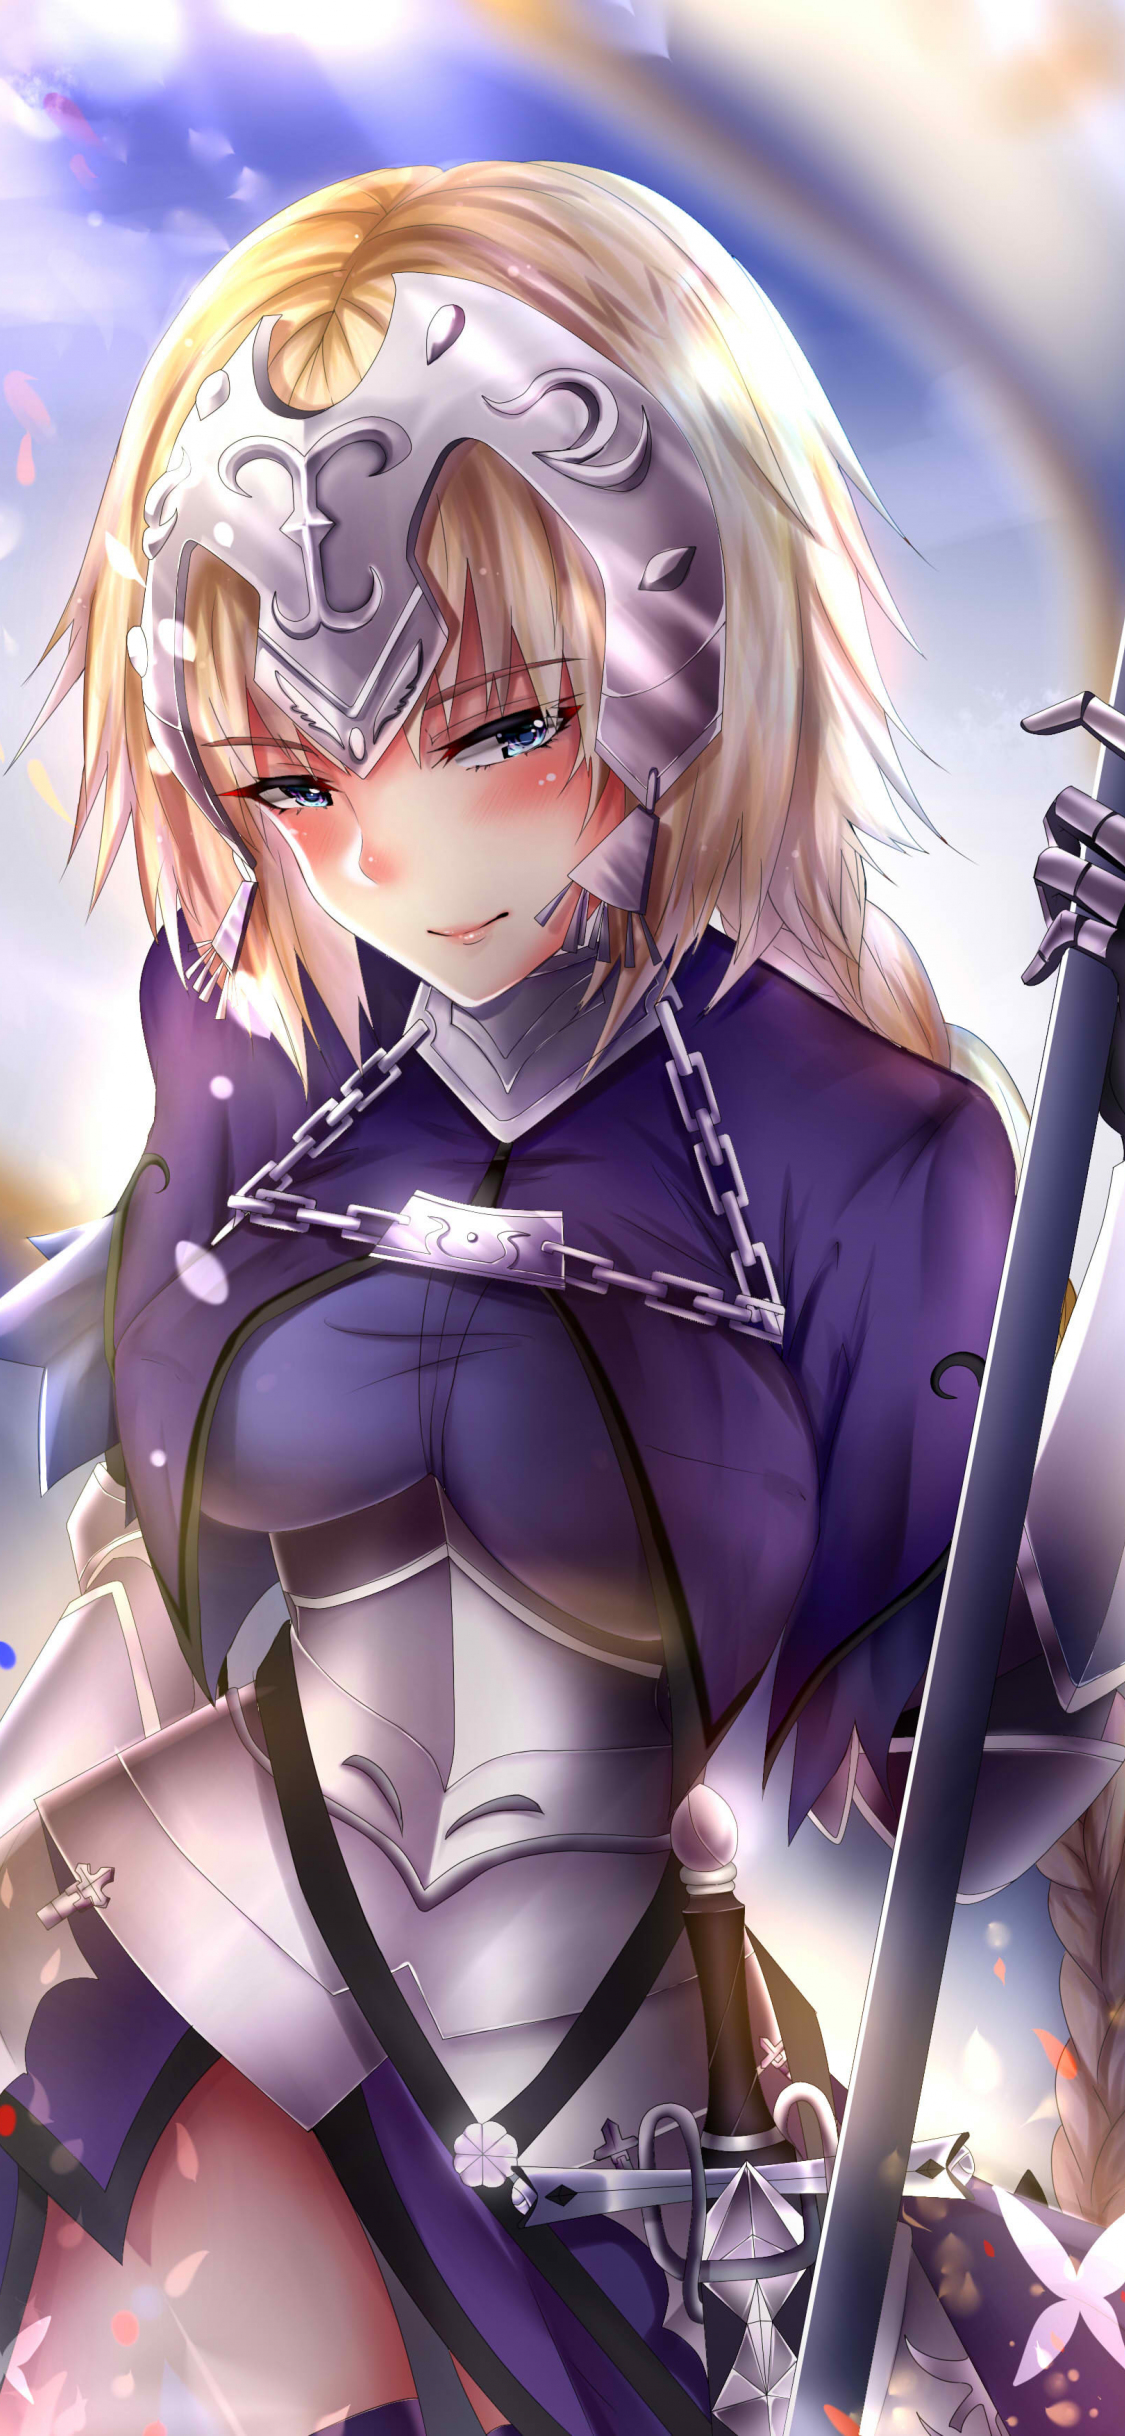 Download 1125x2436 Wallpaper Beautiful Jeanne D Arc Fate Stay Night Iphone X 1125x2436 Hd Image Background 3233